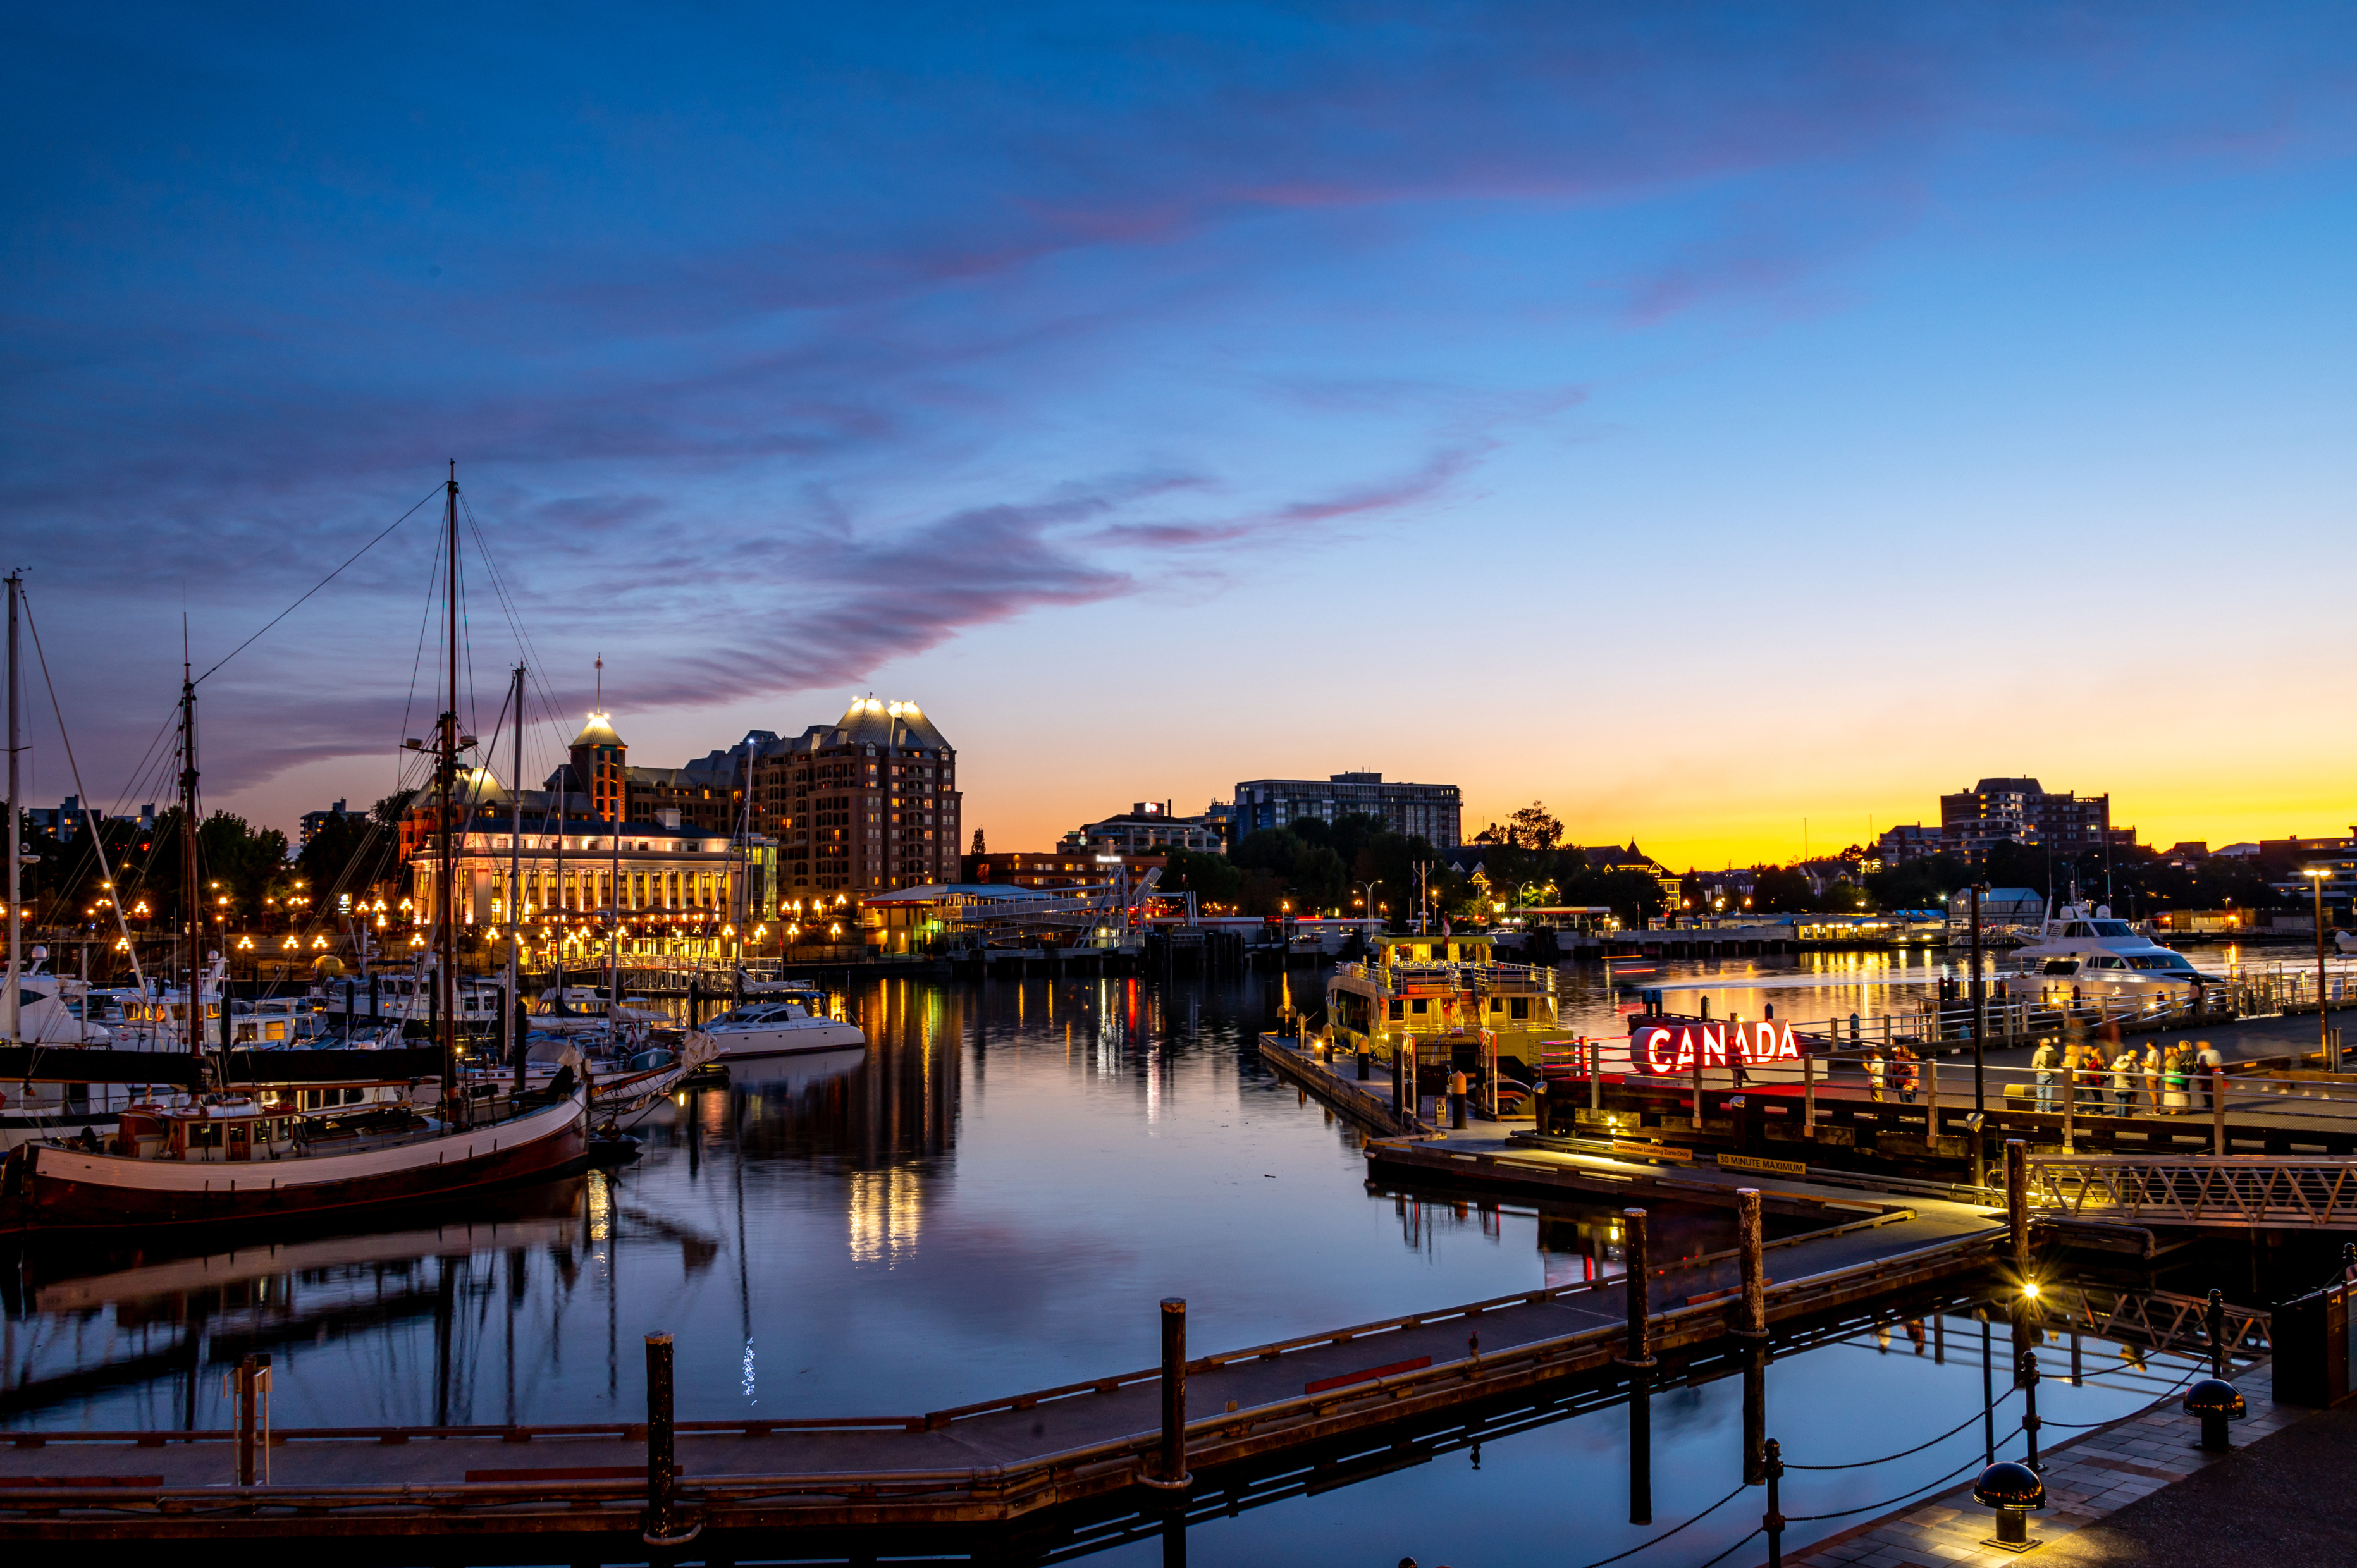 Harbor with boats at dusk, city skyline in the background, large &quot;CANADA&quot; sign illuminated on the dock